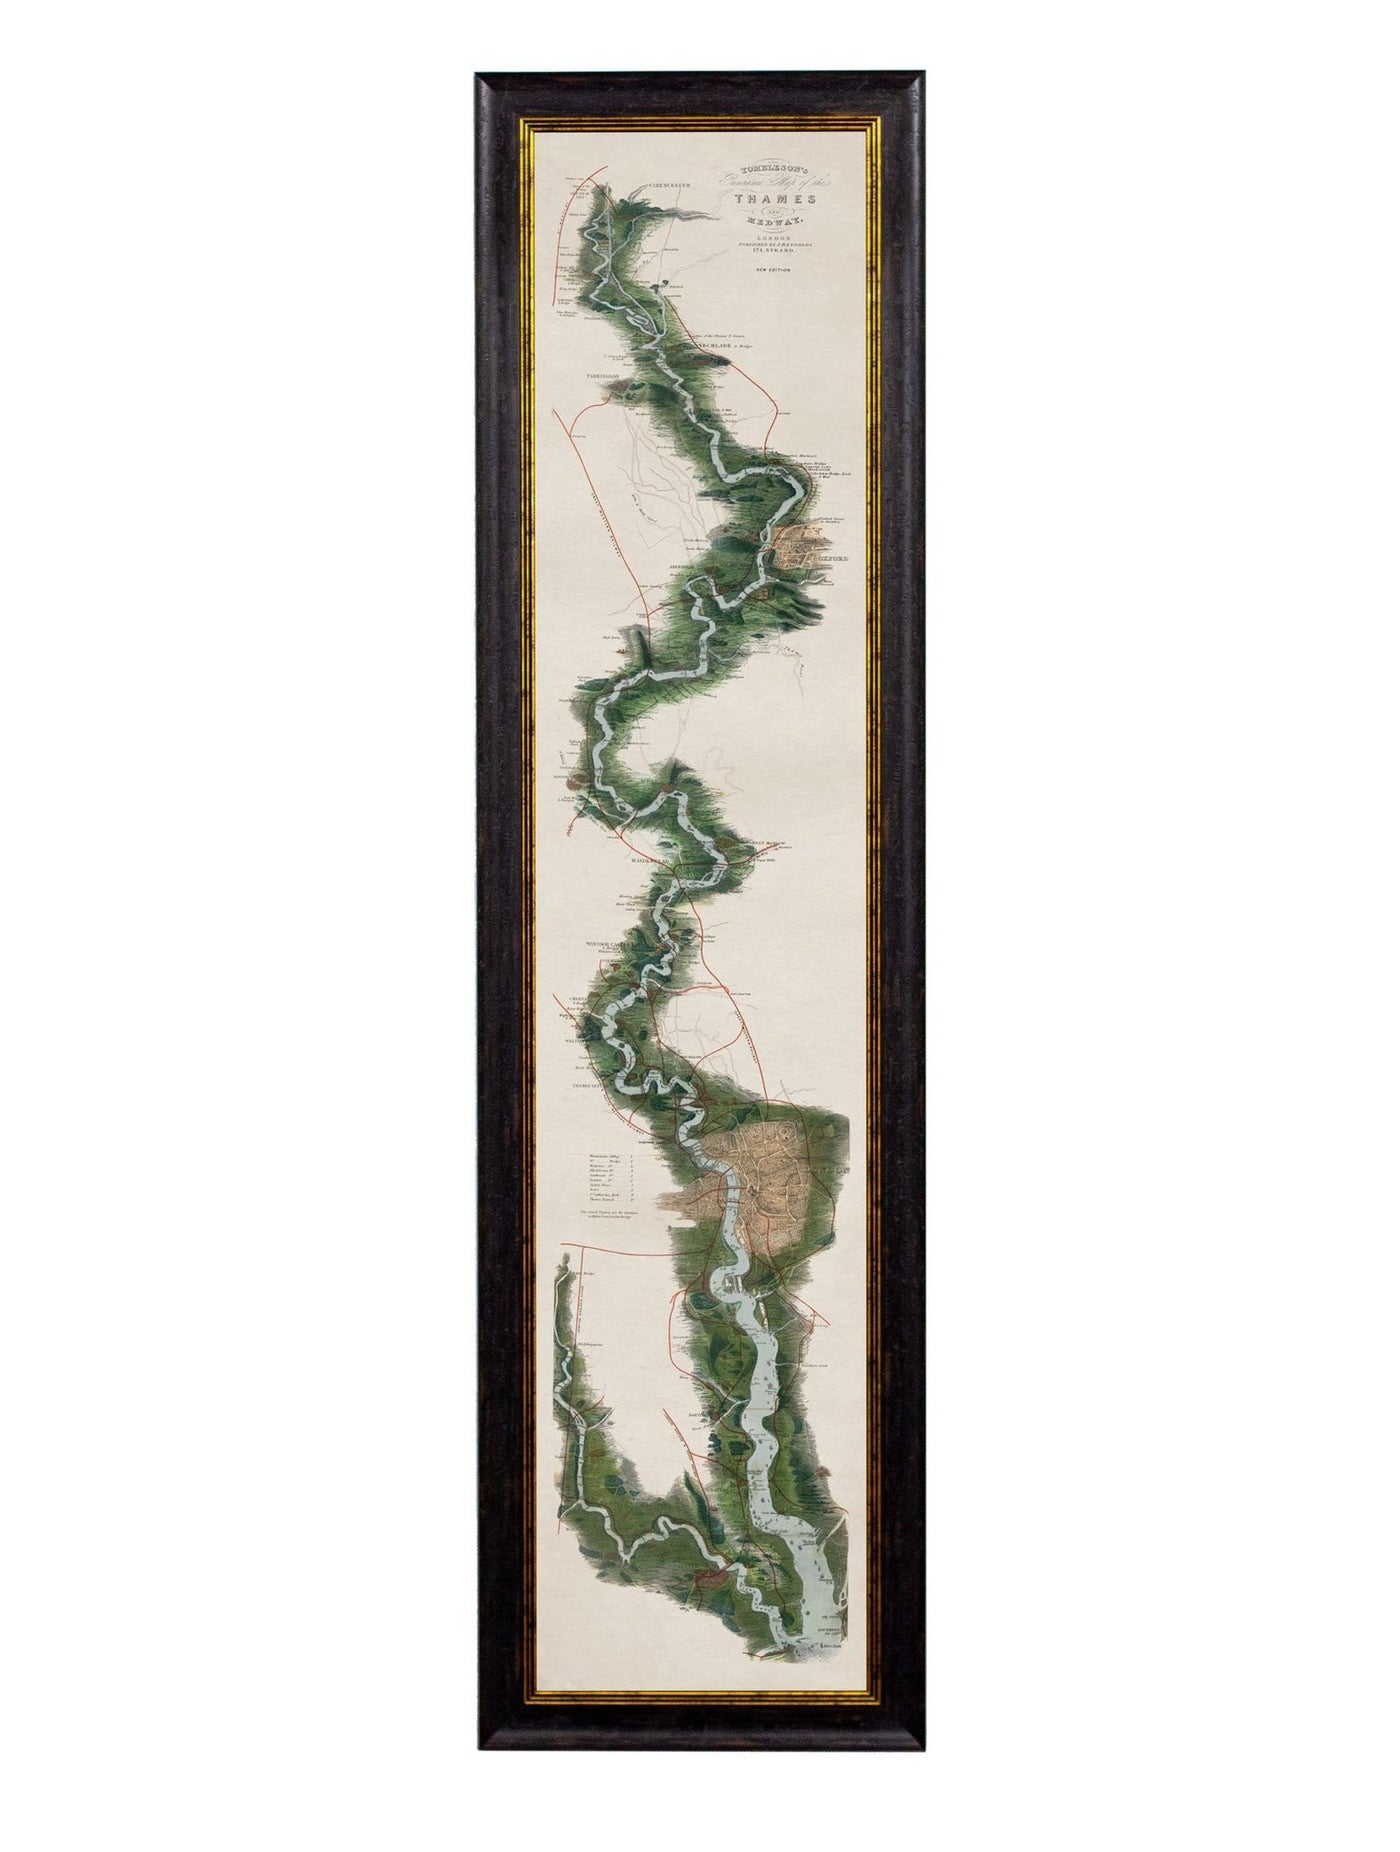 C.1834 PANORAMIC MAP OF THE THAMES - TheArtistsQuarter